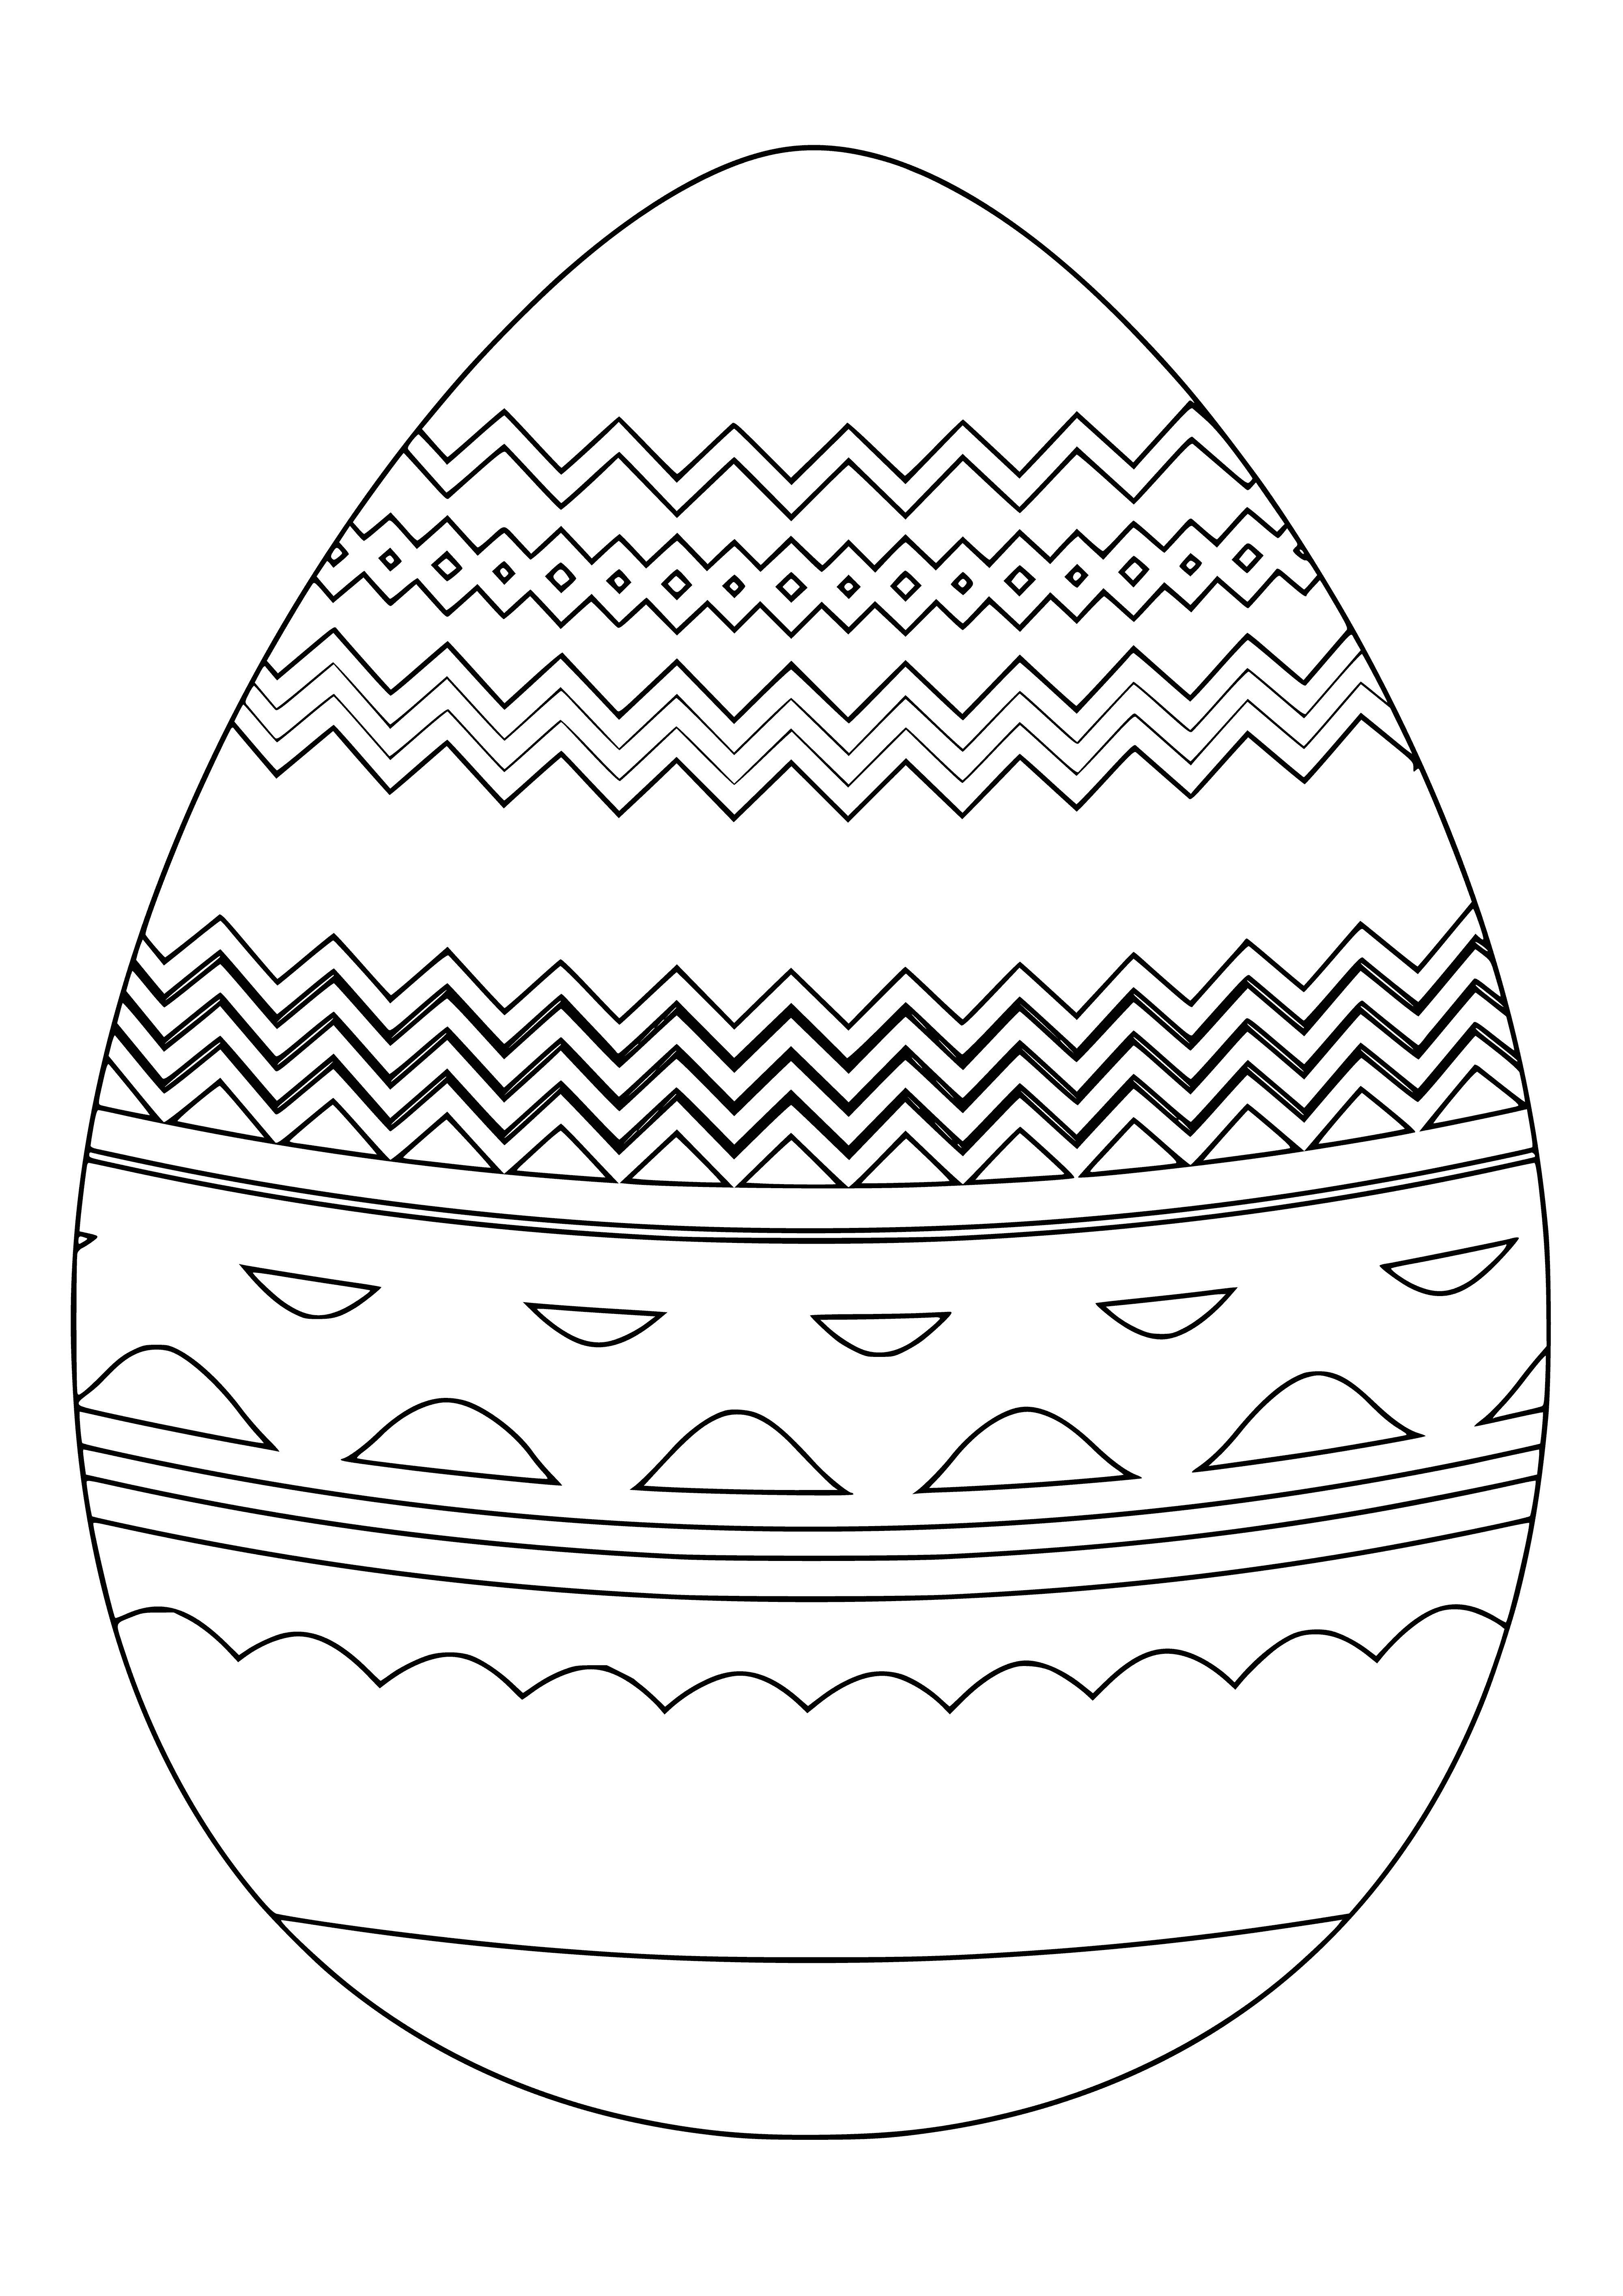 coloring page: Four eggs, two brown and two white, in green grass with stripes and dots.